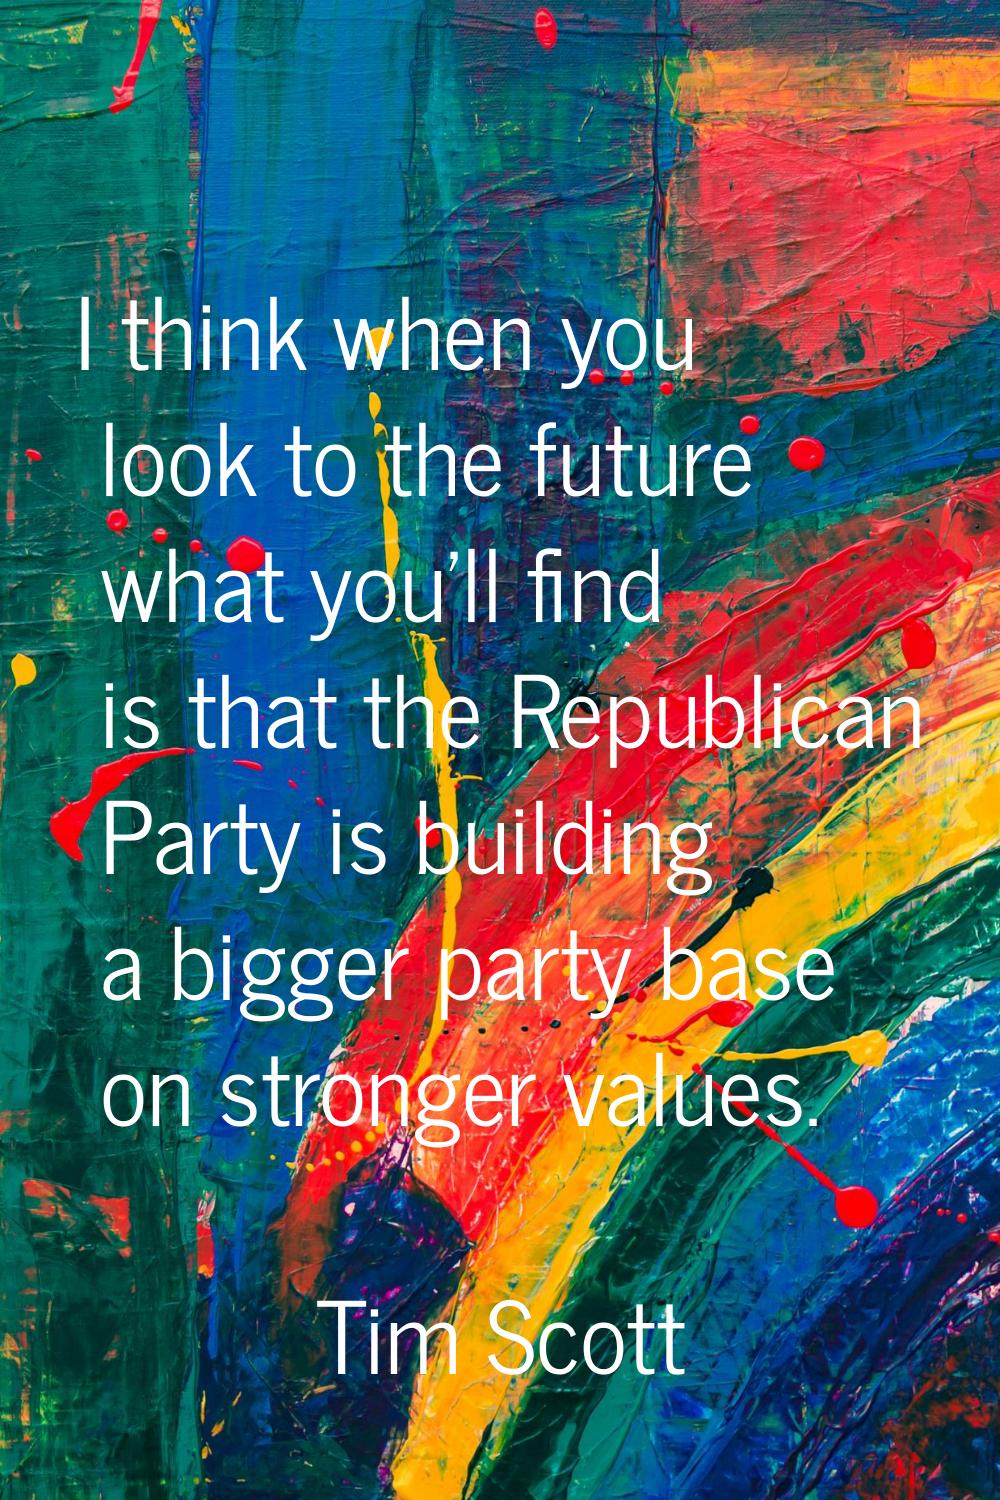 I think when you look to the future what you'll find is that the Republican Party is building a big